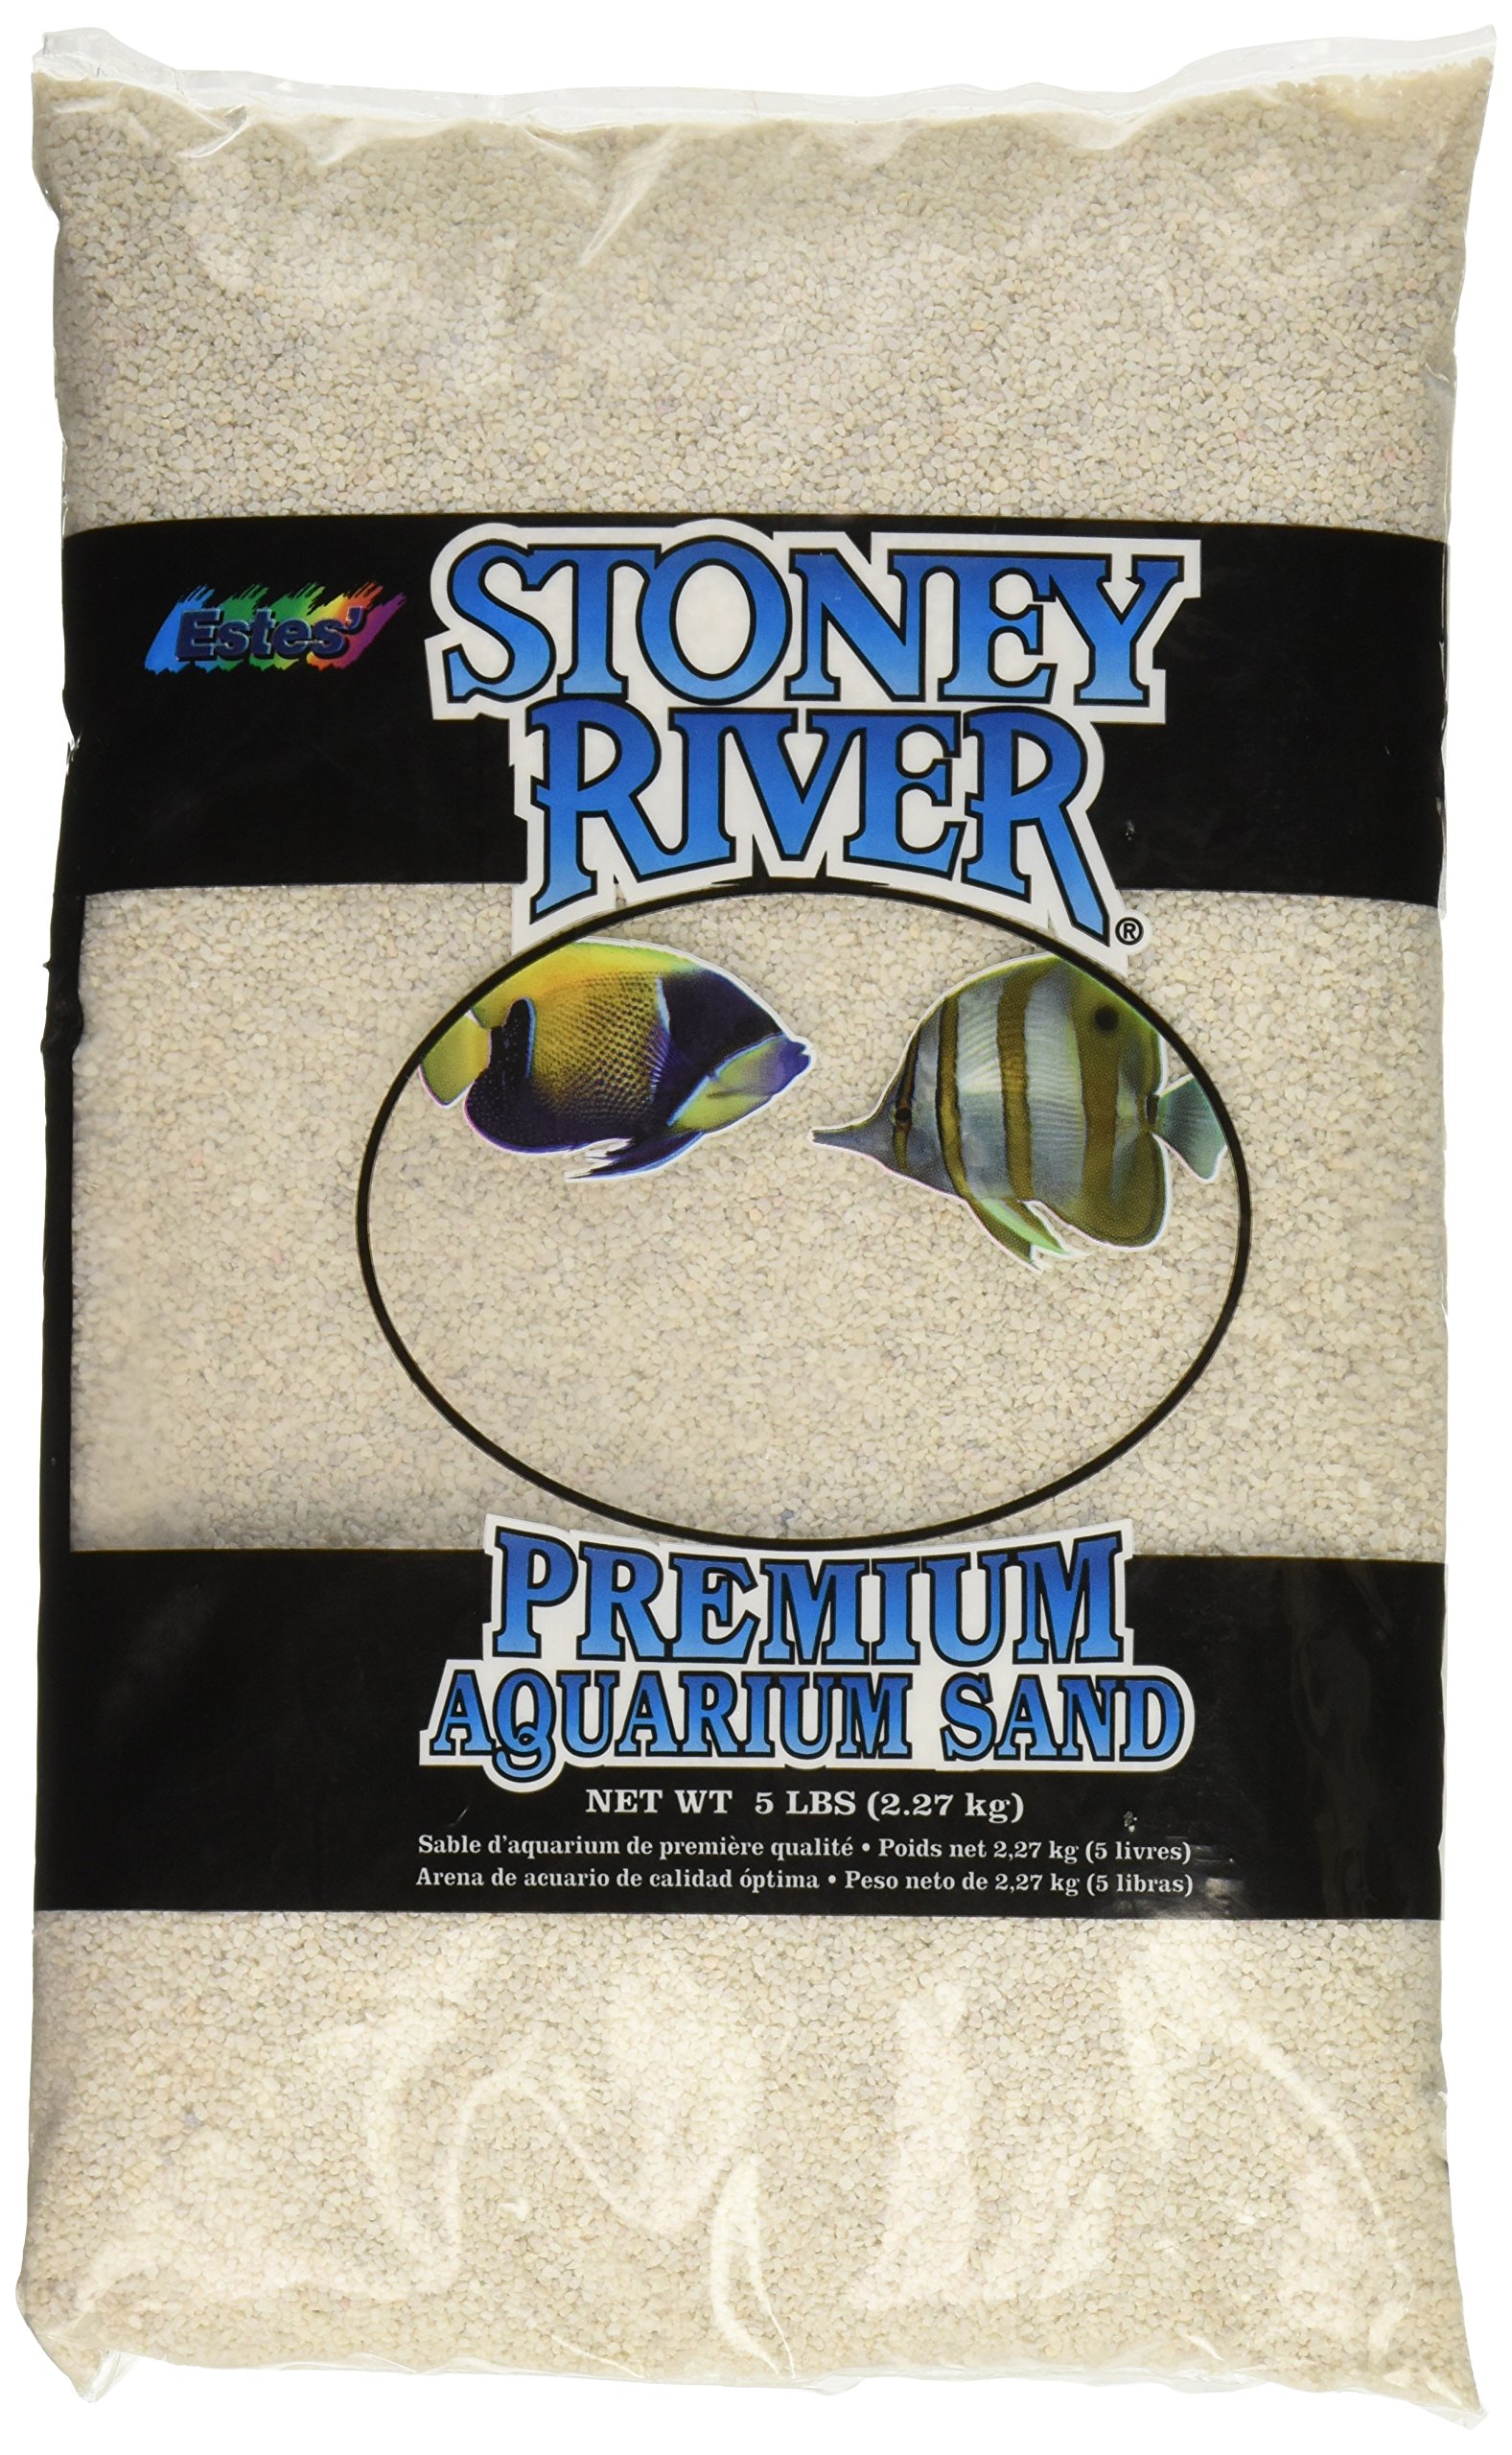 Stoney River White Aquatic Sand: Ideal for Freshwater and Marine Aquariums